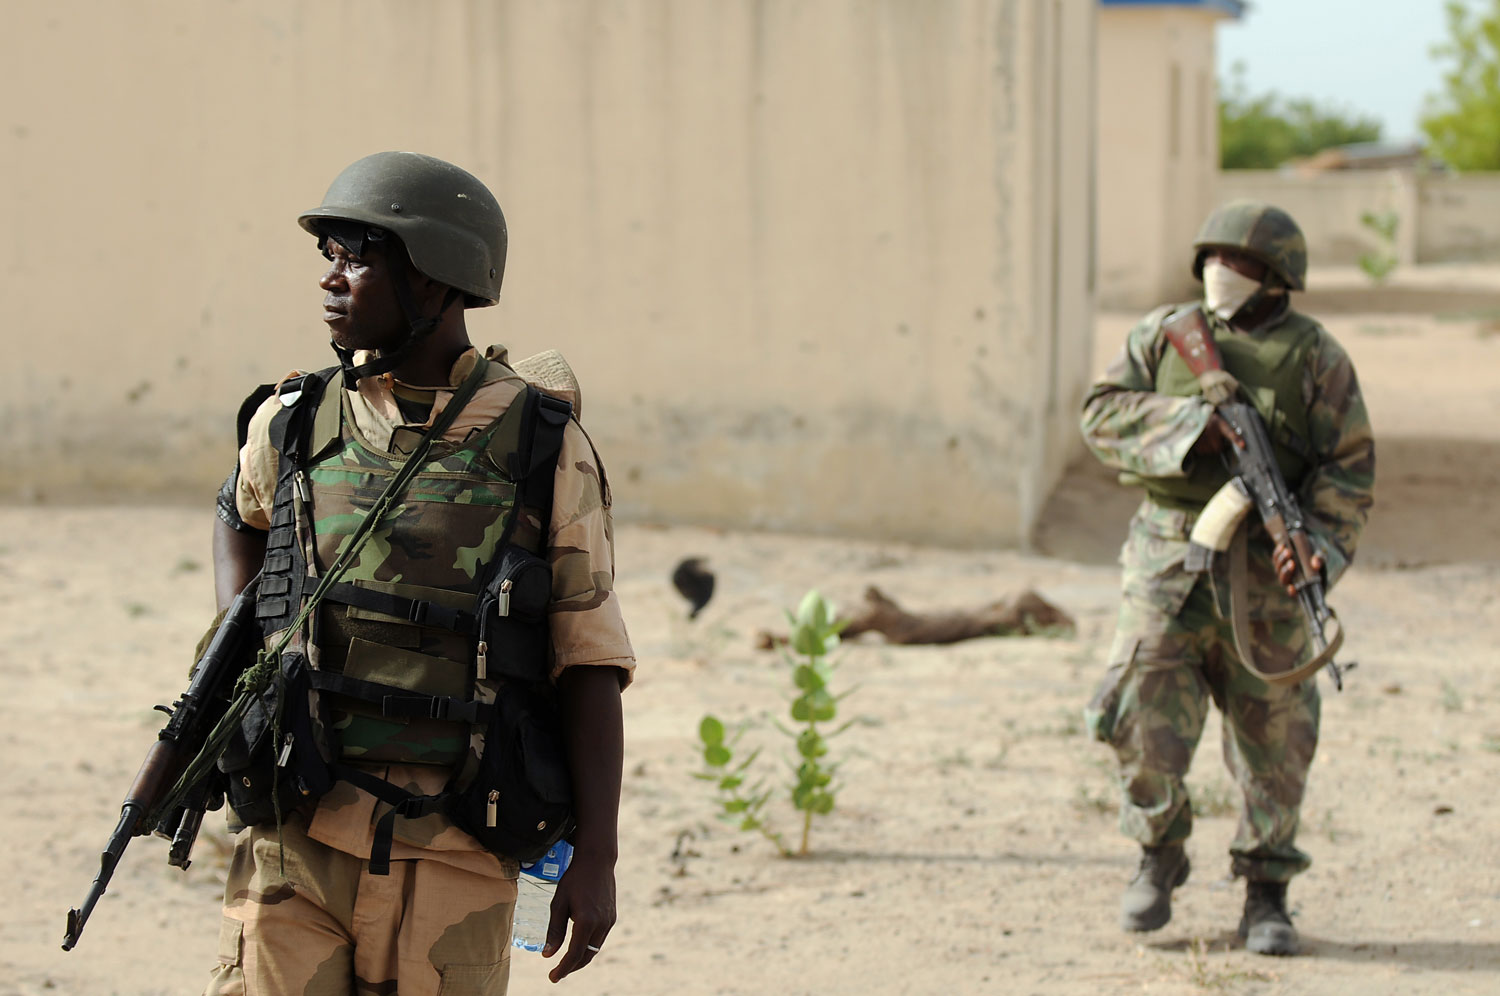 Nigerian soldiers patrol in the north of Borno state close to a Islamist extremist group Boko Haram former camp on June 5, 2013 near Maiduguri. (Quentin Leboucher—AFP/Getty Images)